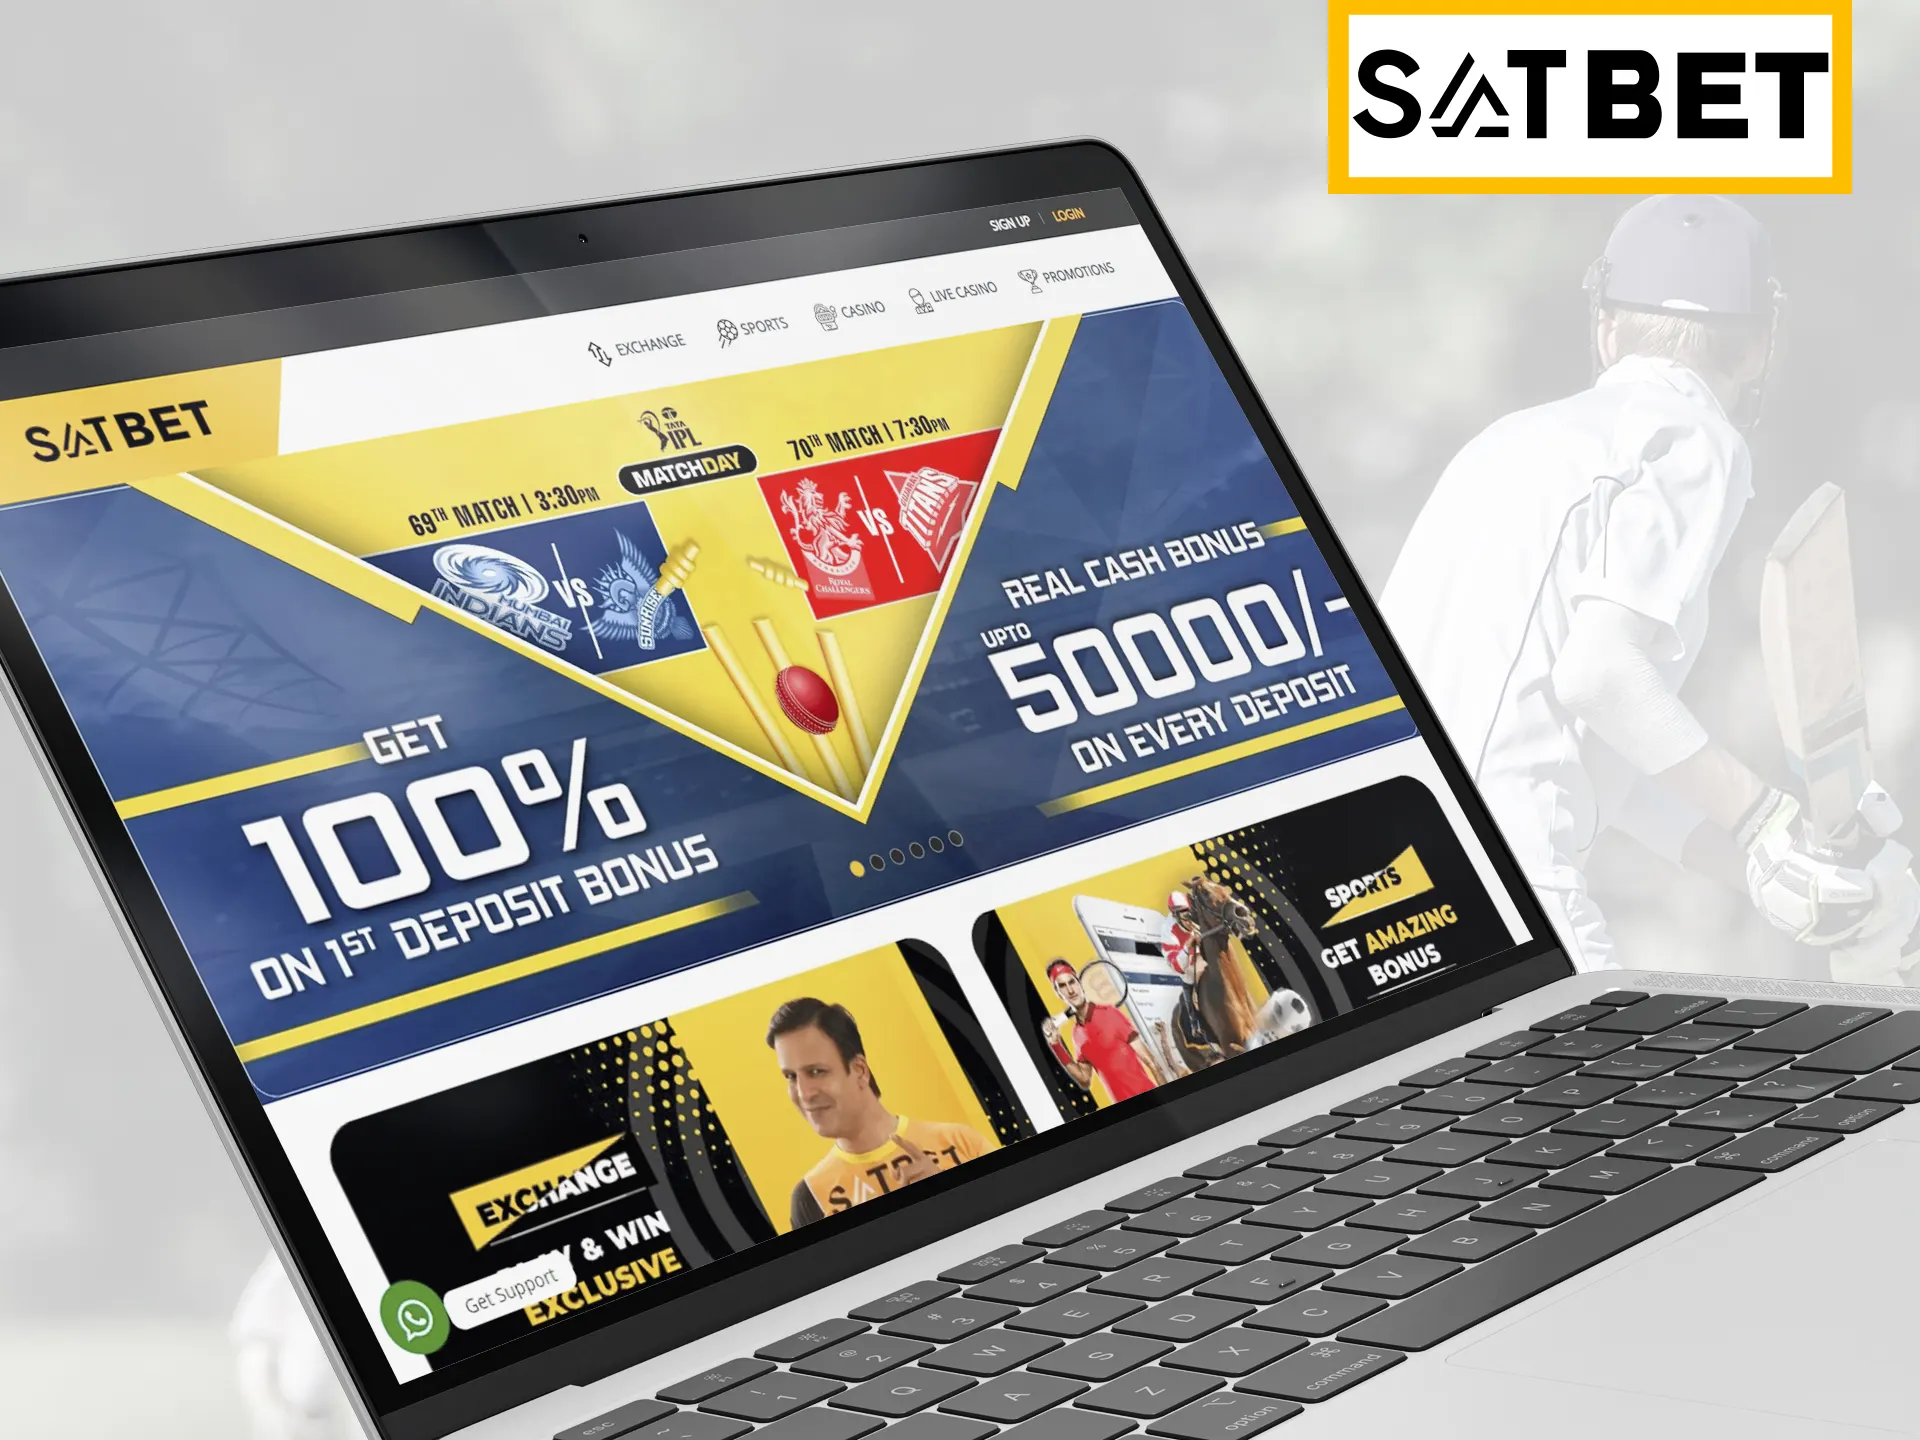 Visit Satbet official page and start playing.